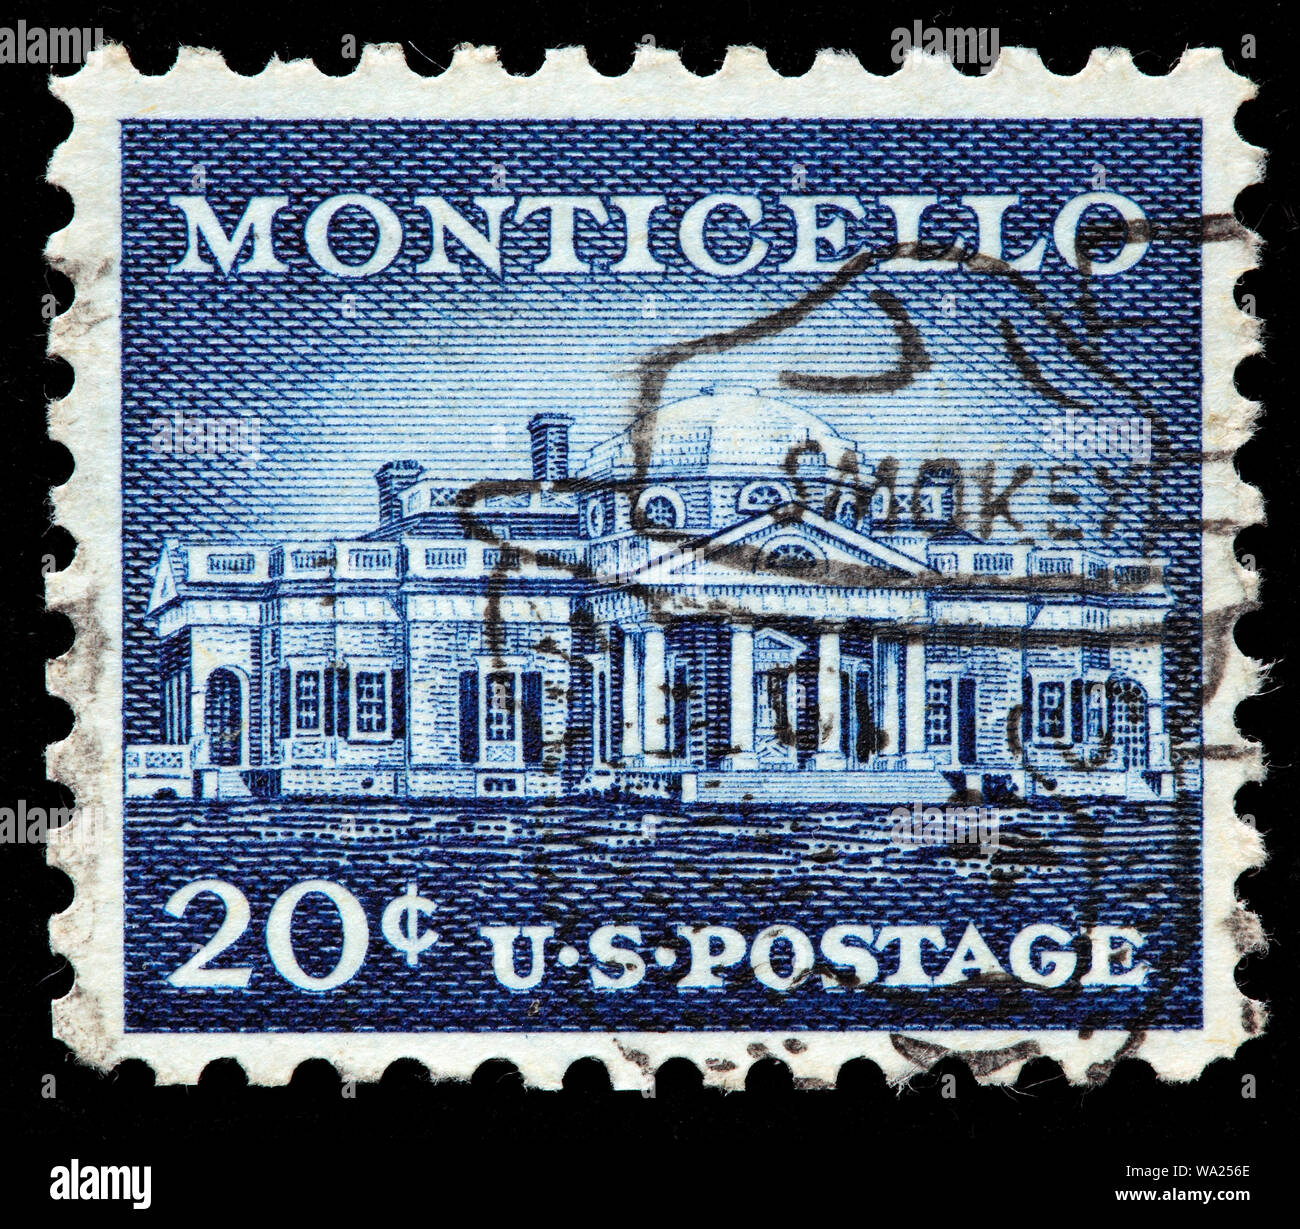 Monticello, Charlottesville, Virginie, 1772, timbre-poste, USA, 1956 Banque D'Images